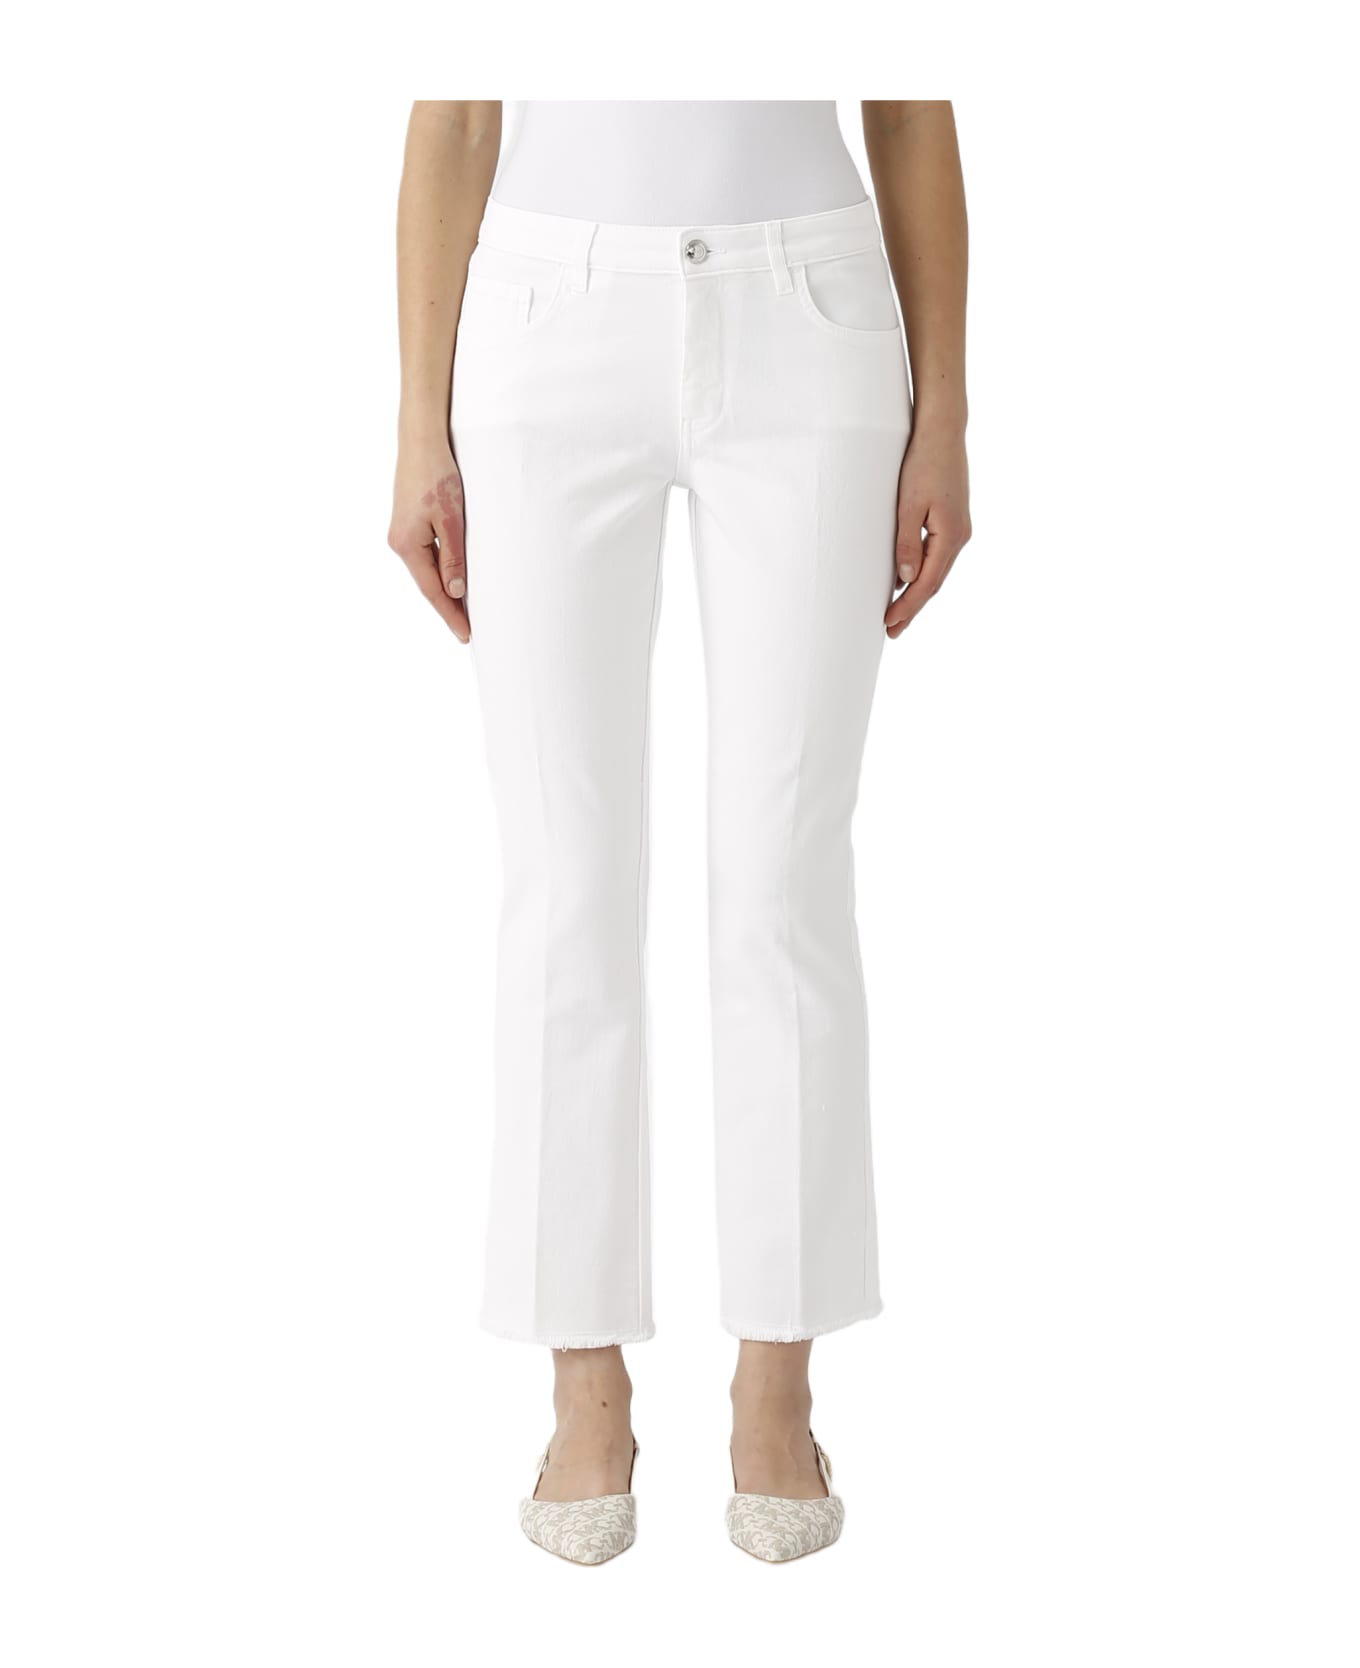 Fay Pant. Cropped F.do Frangia Jeans - BIANCO